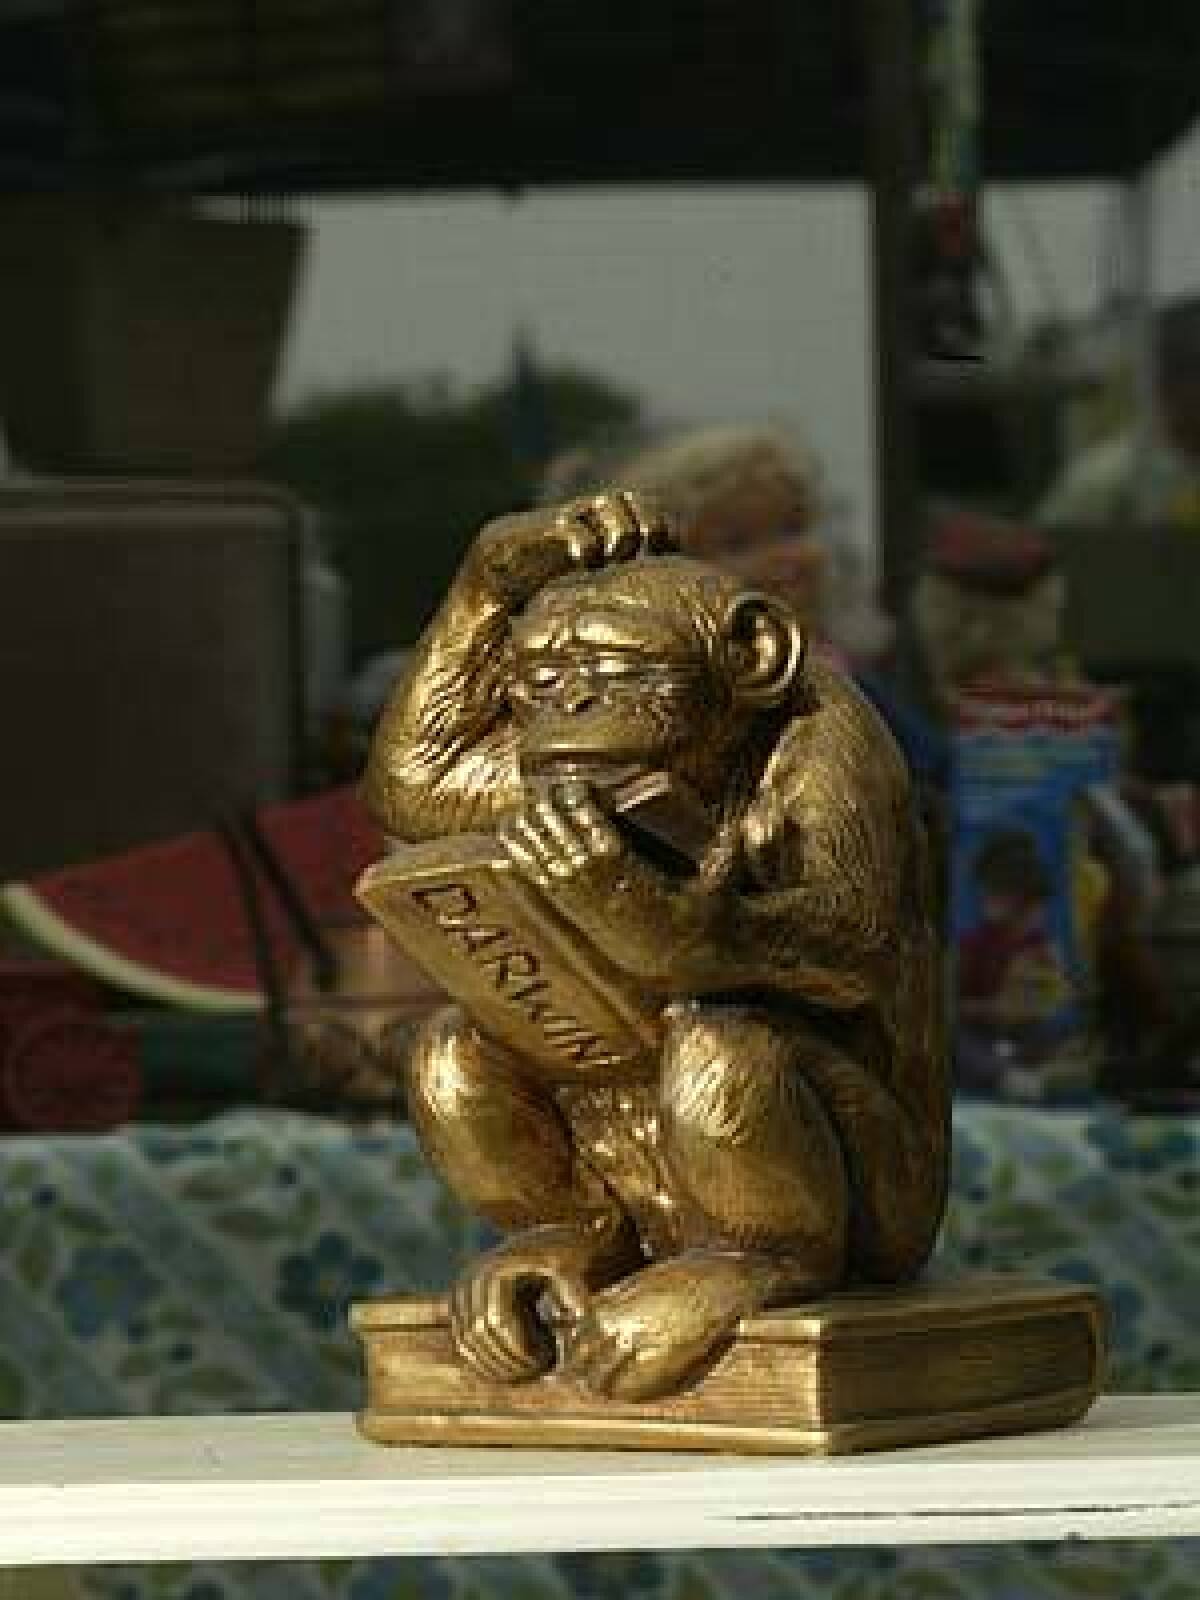 A monkey reading Darwin, at the Long Beach Outdoor Antique & Collectible Market.